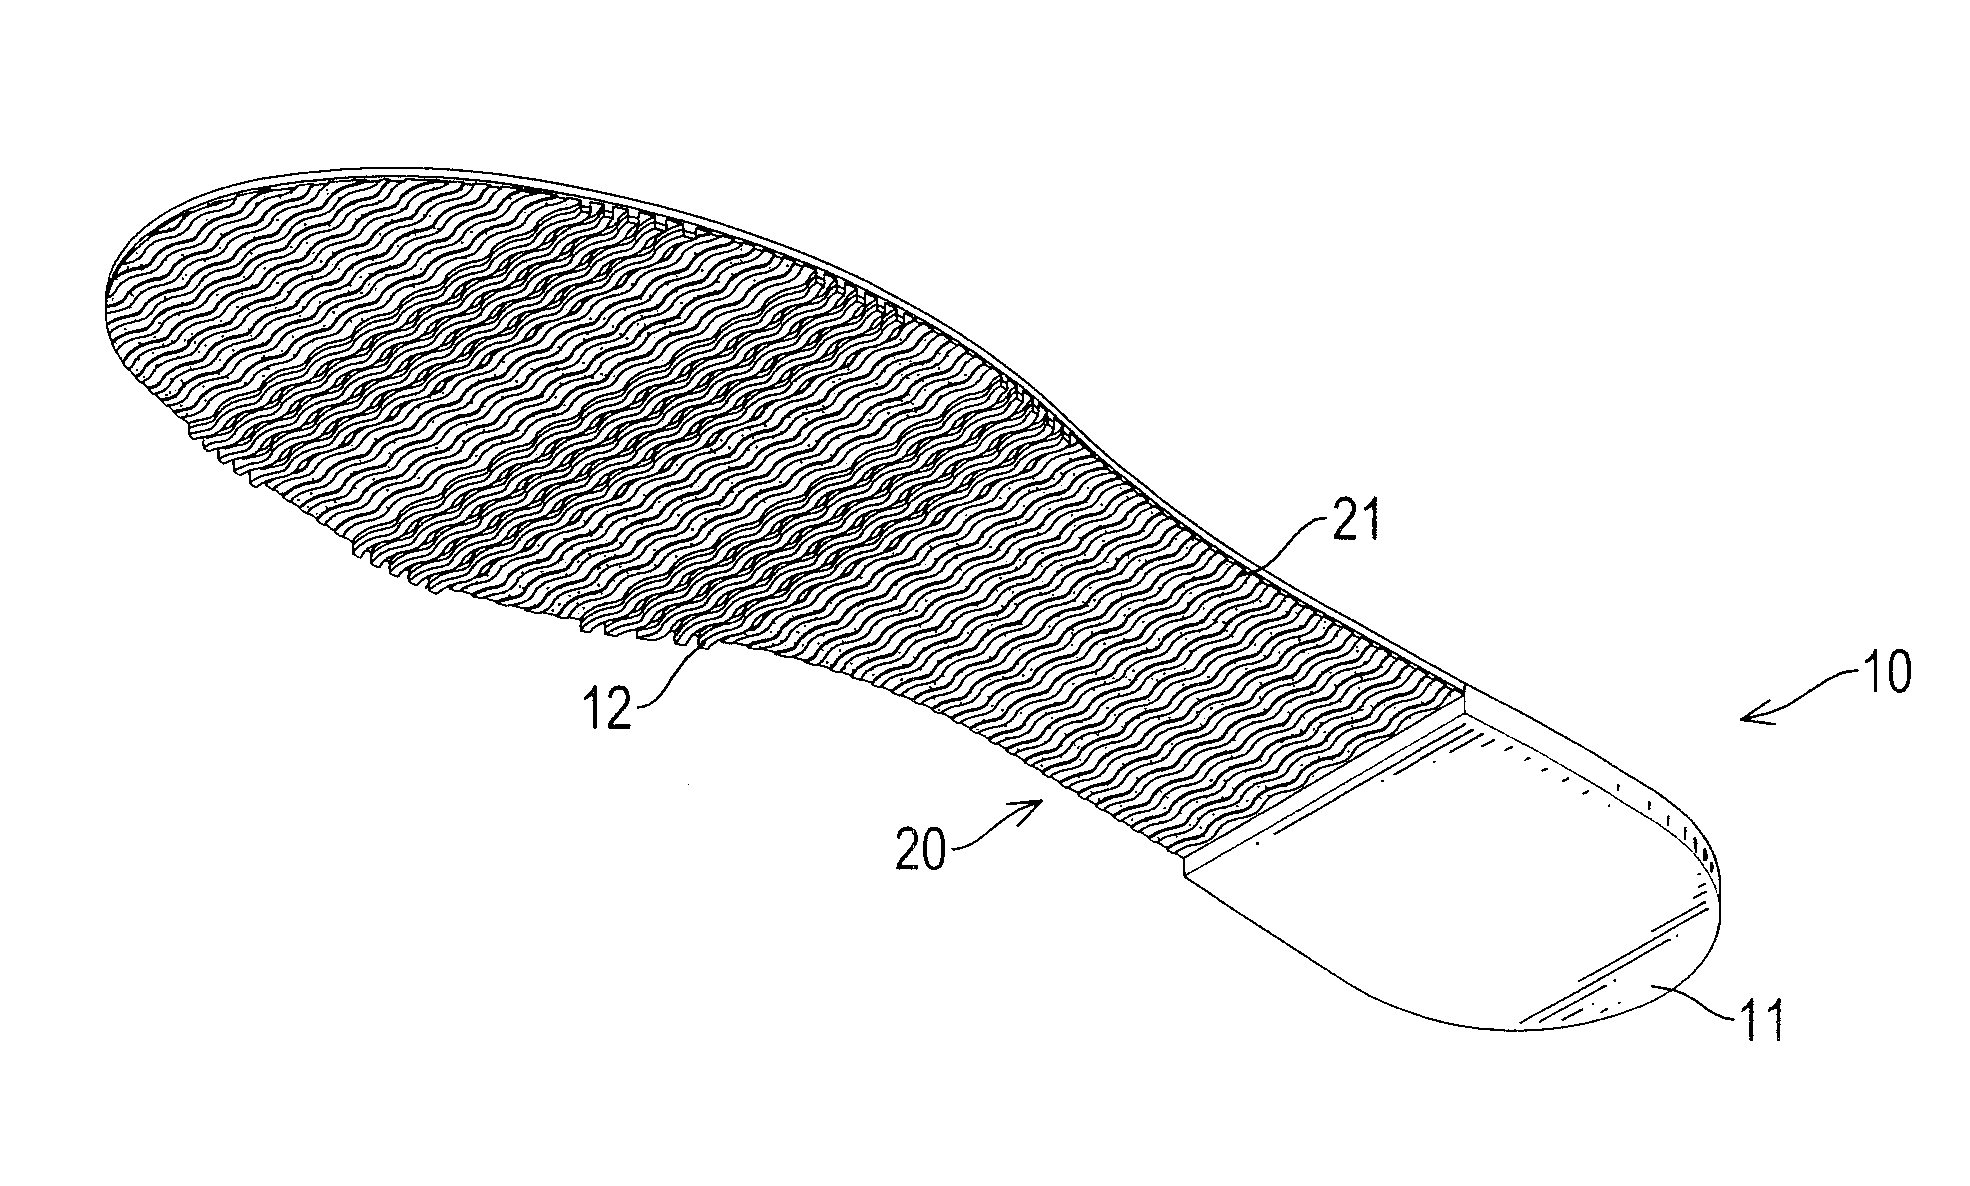 Outsole with an embedded fabric layer